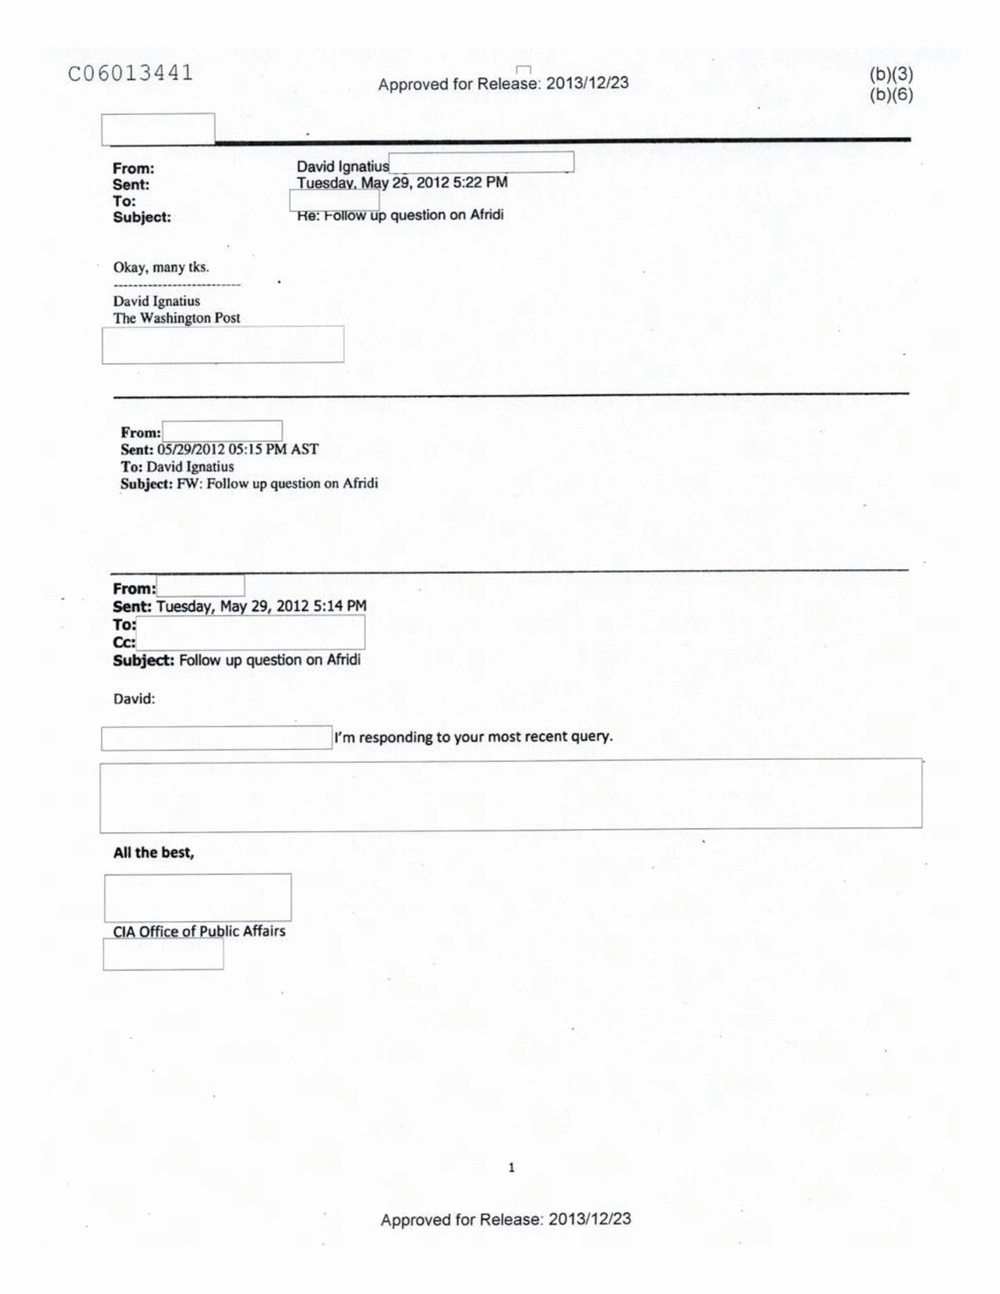 Page 305 from Email Correspondence Between Reporters and CIA Flacks